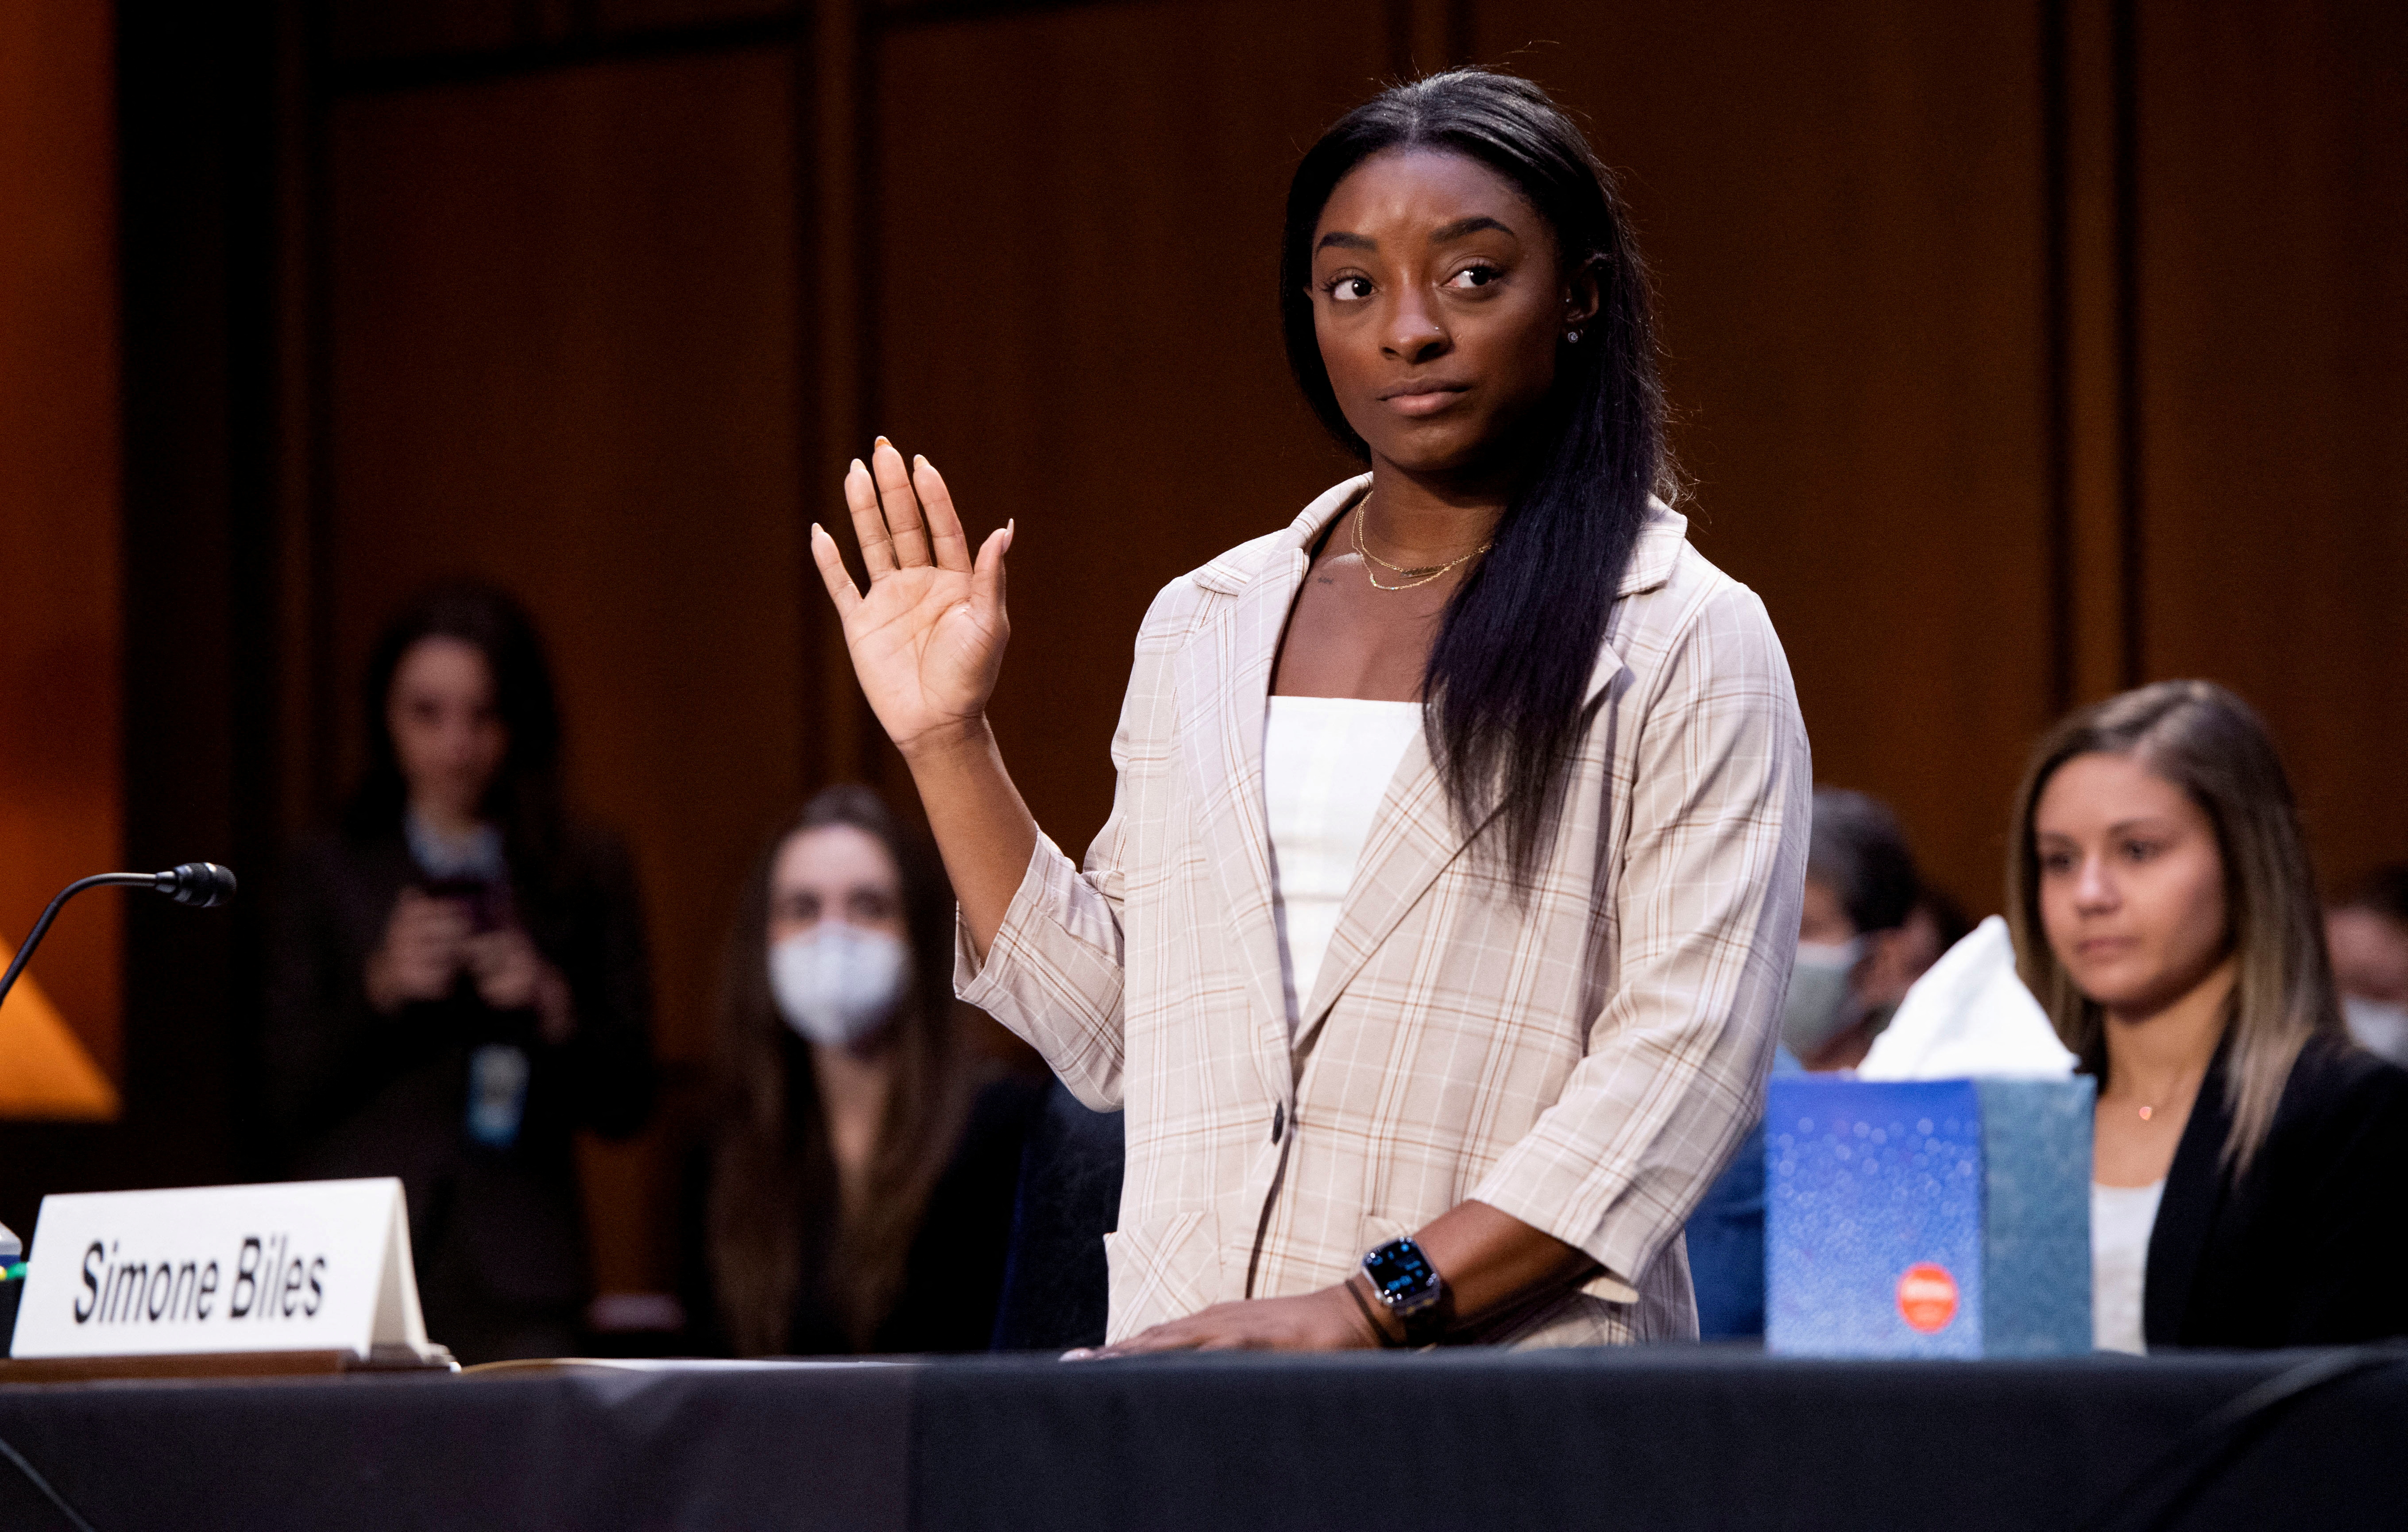 FILE PHOTO: U.S. Olympic gymnast Simone Biles is sworn in to testify during a Senate Judiciary hearing about the Inspector General's report on the FBI handling of the Larry Nassar investigation of sexual abuse of Olympic gymnasts, on Capitol Hill, in Washington, D.C., U.S., September 15, 2021. Saul Loeb/Pool via REUTERS/File Photo